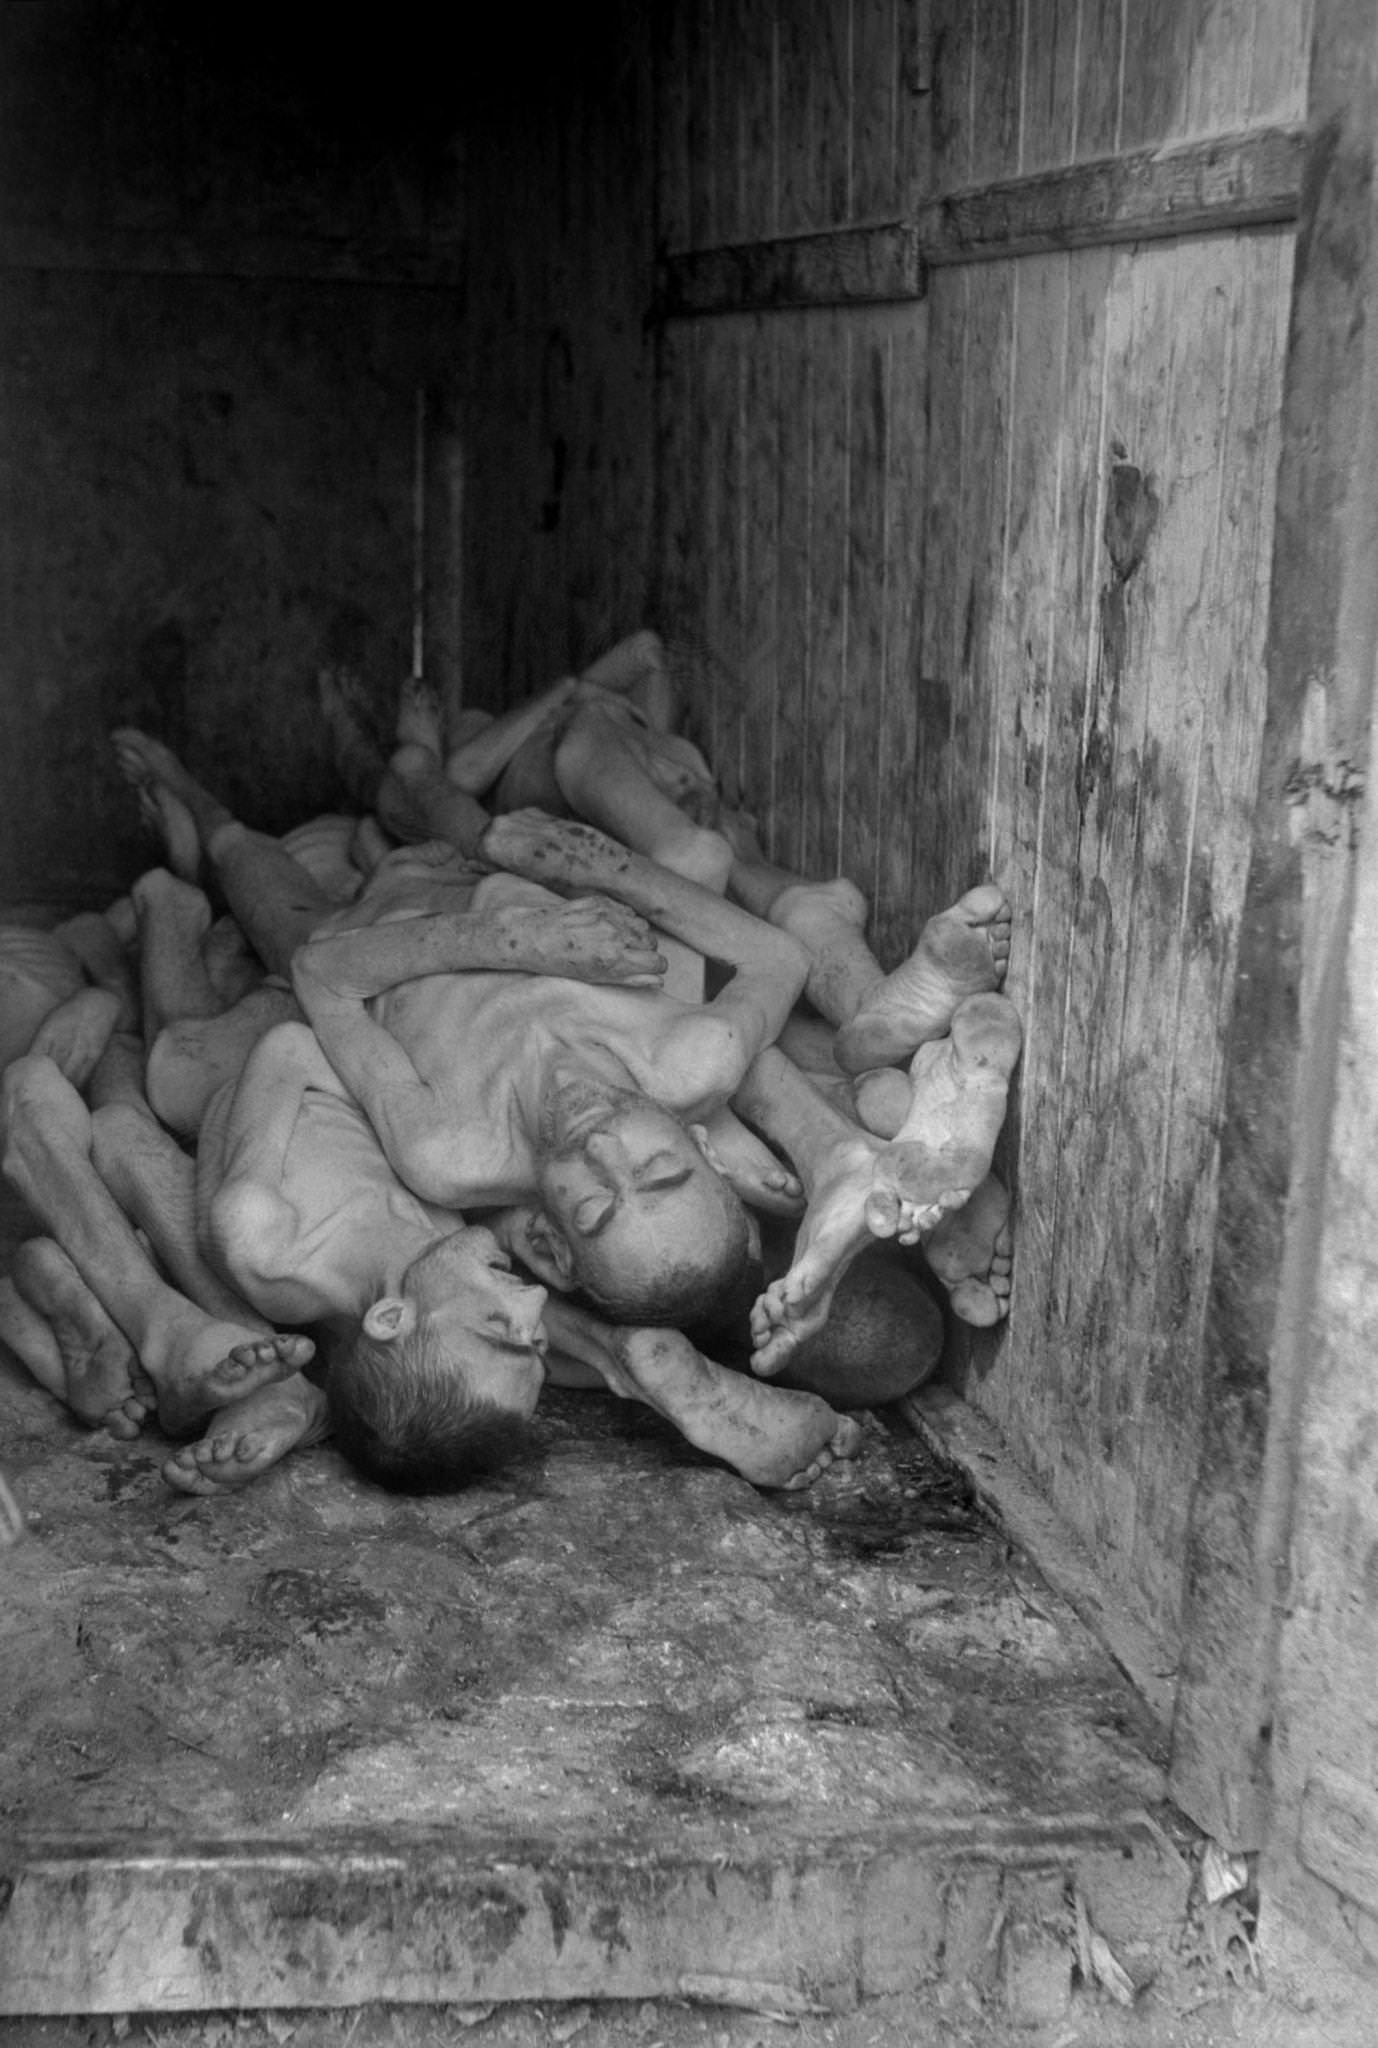 Corpses of prisoners piled up at Buchenwald concentration camp upon its liberation by Allied troops in April 1945.